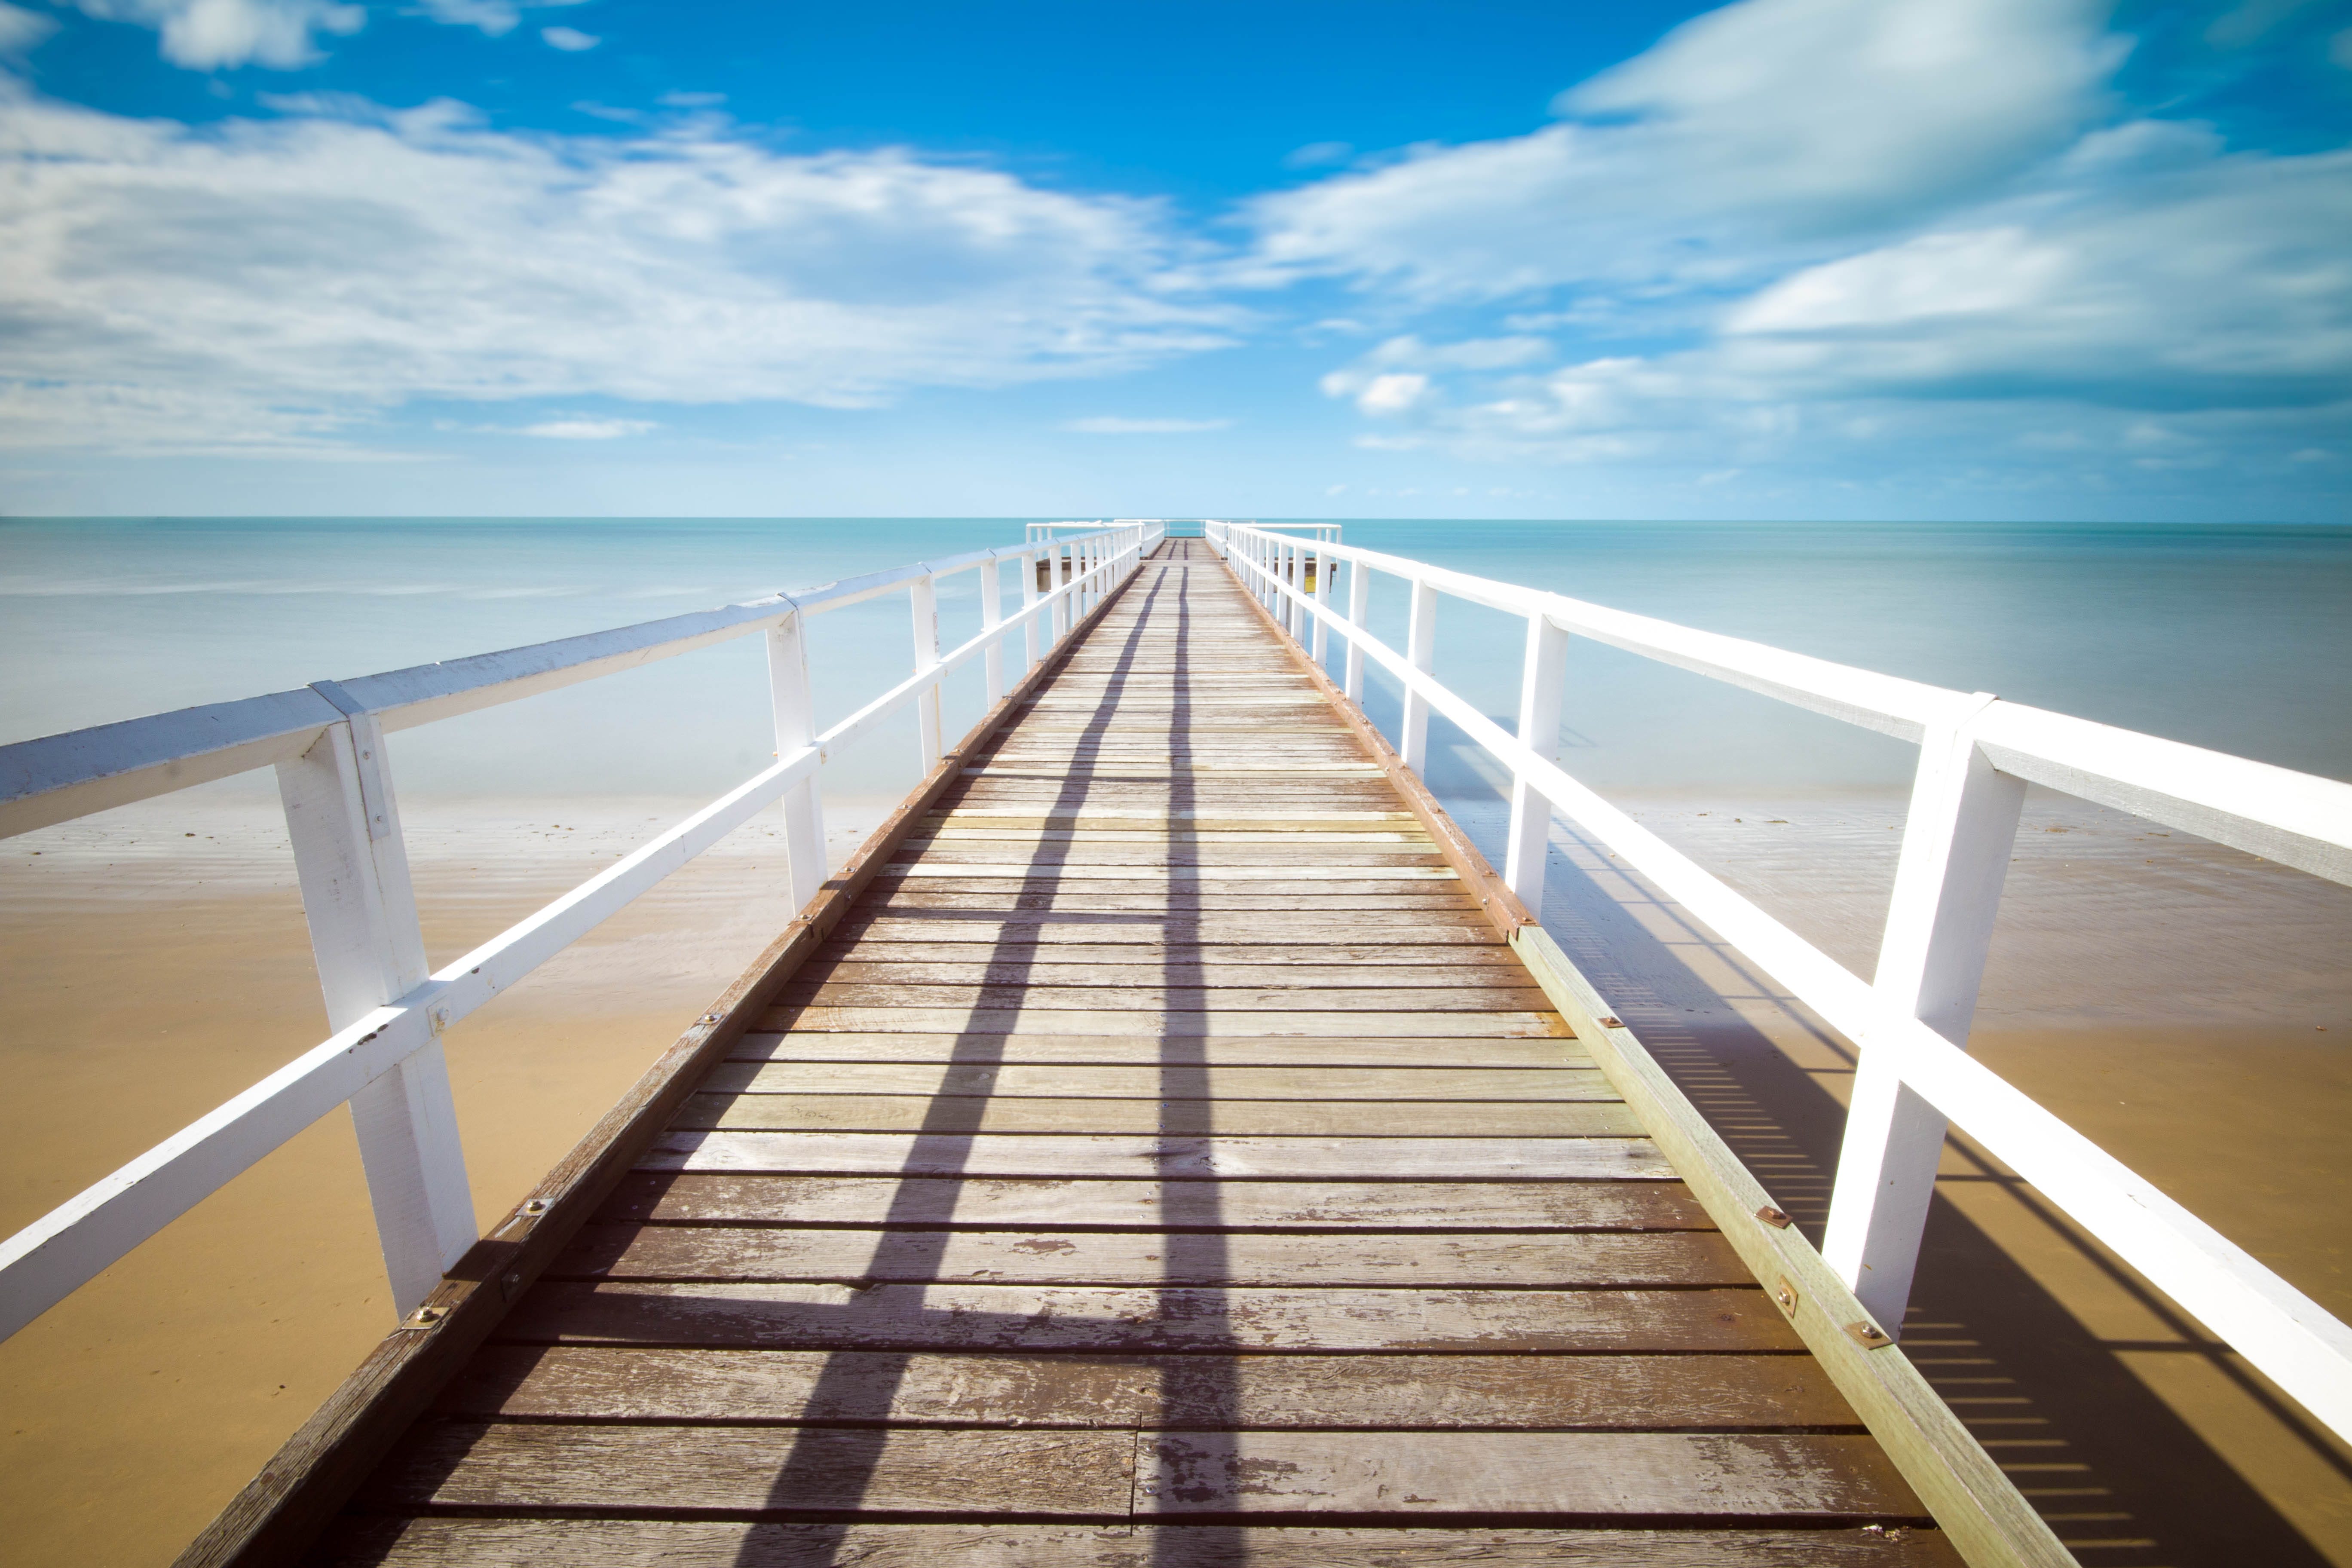 “Wooden pier pathway with white wooden railing” by Christian Holzinger on Unsplash